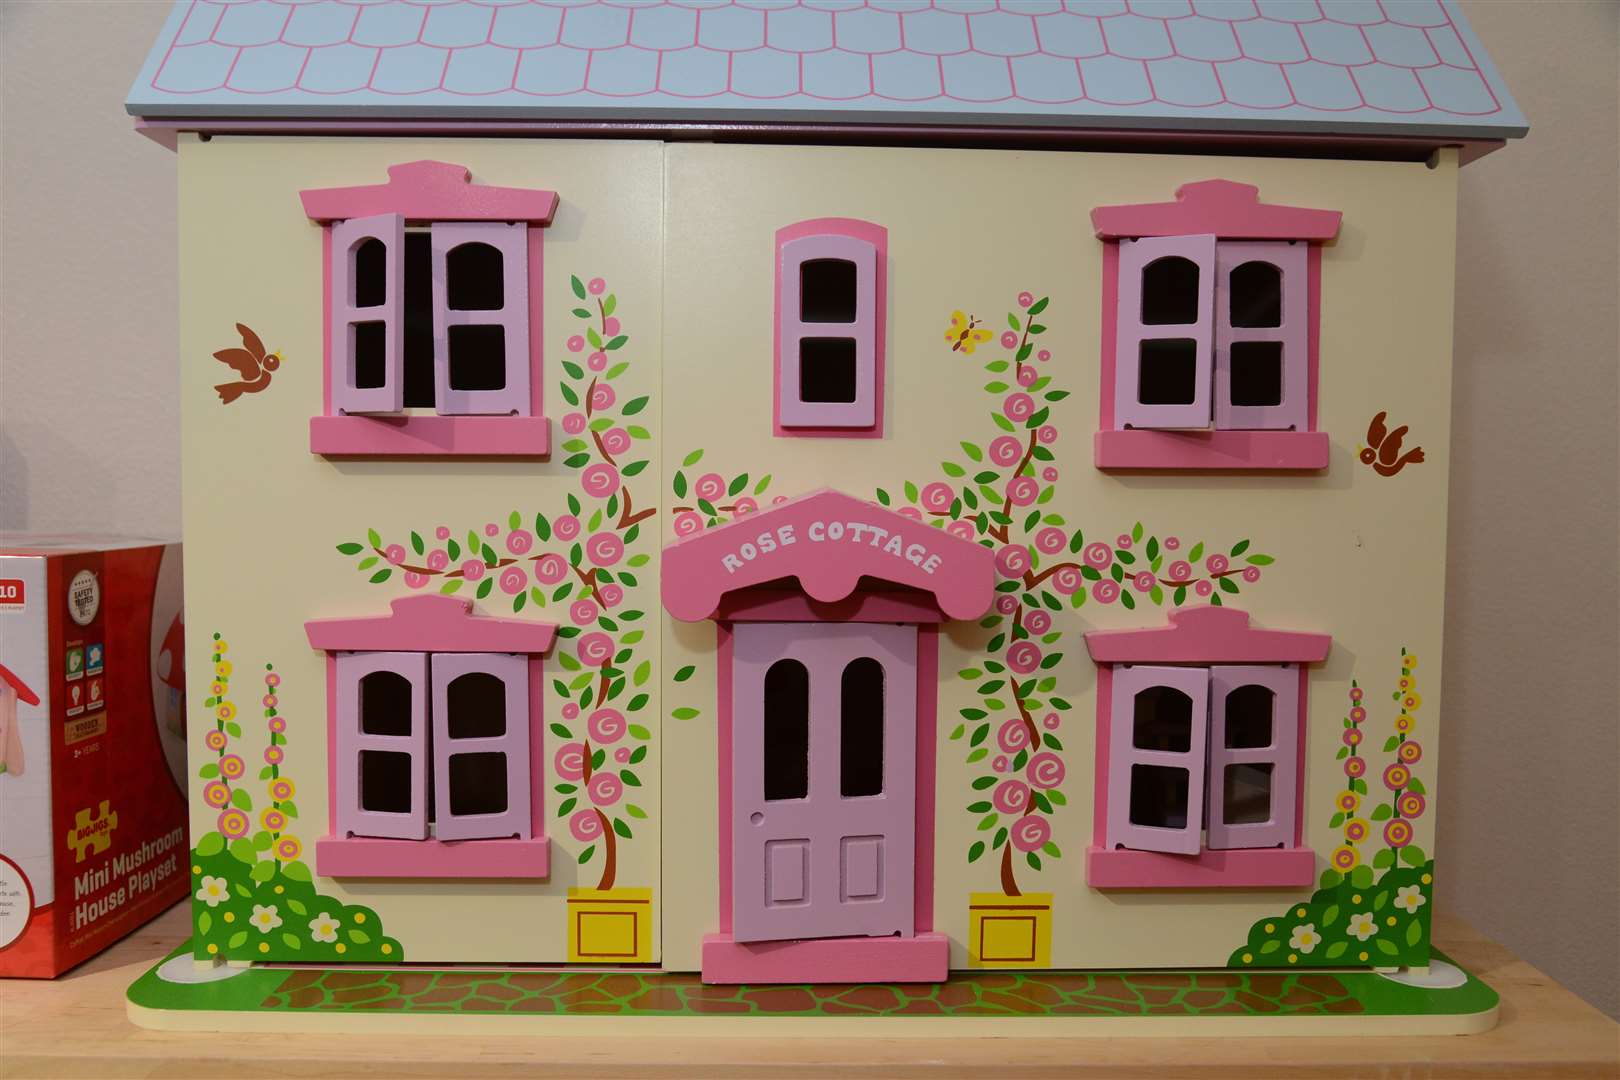 Bigjig Toys brought dolls houses into its range through an acquisition